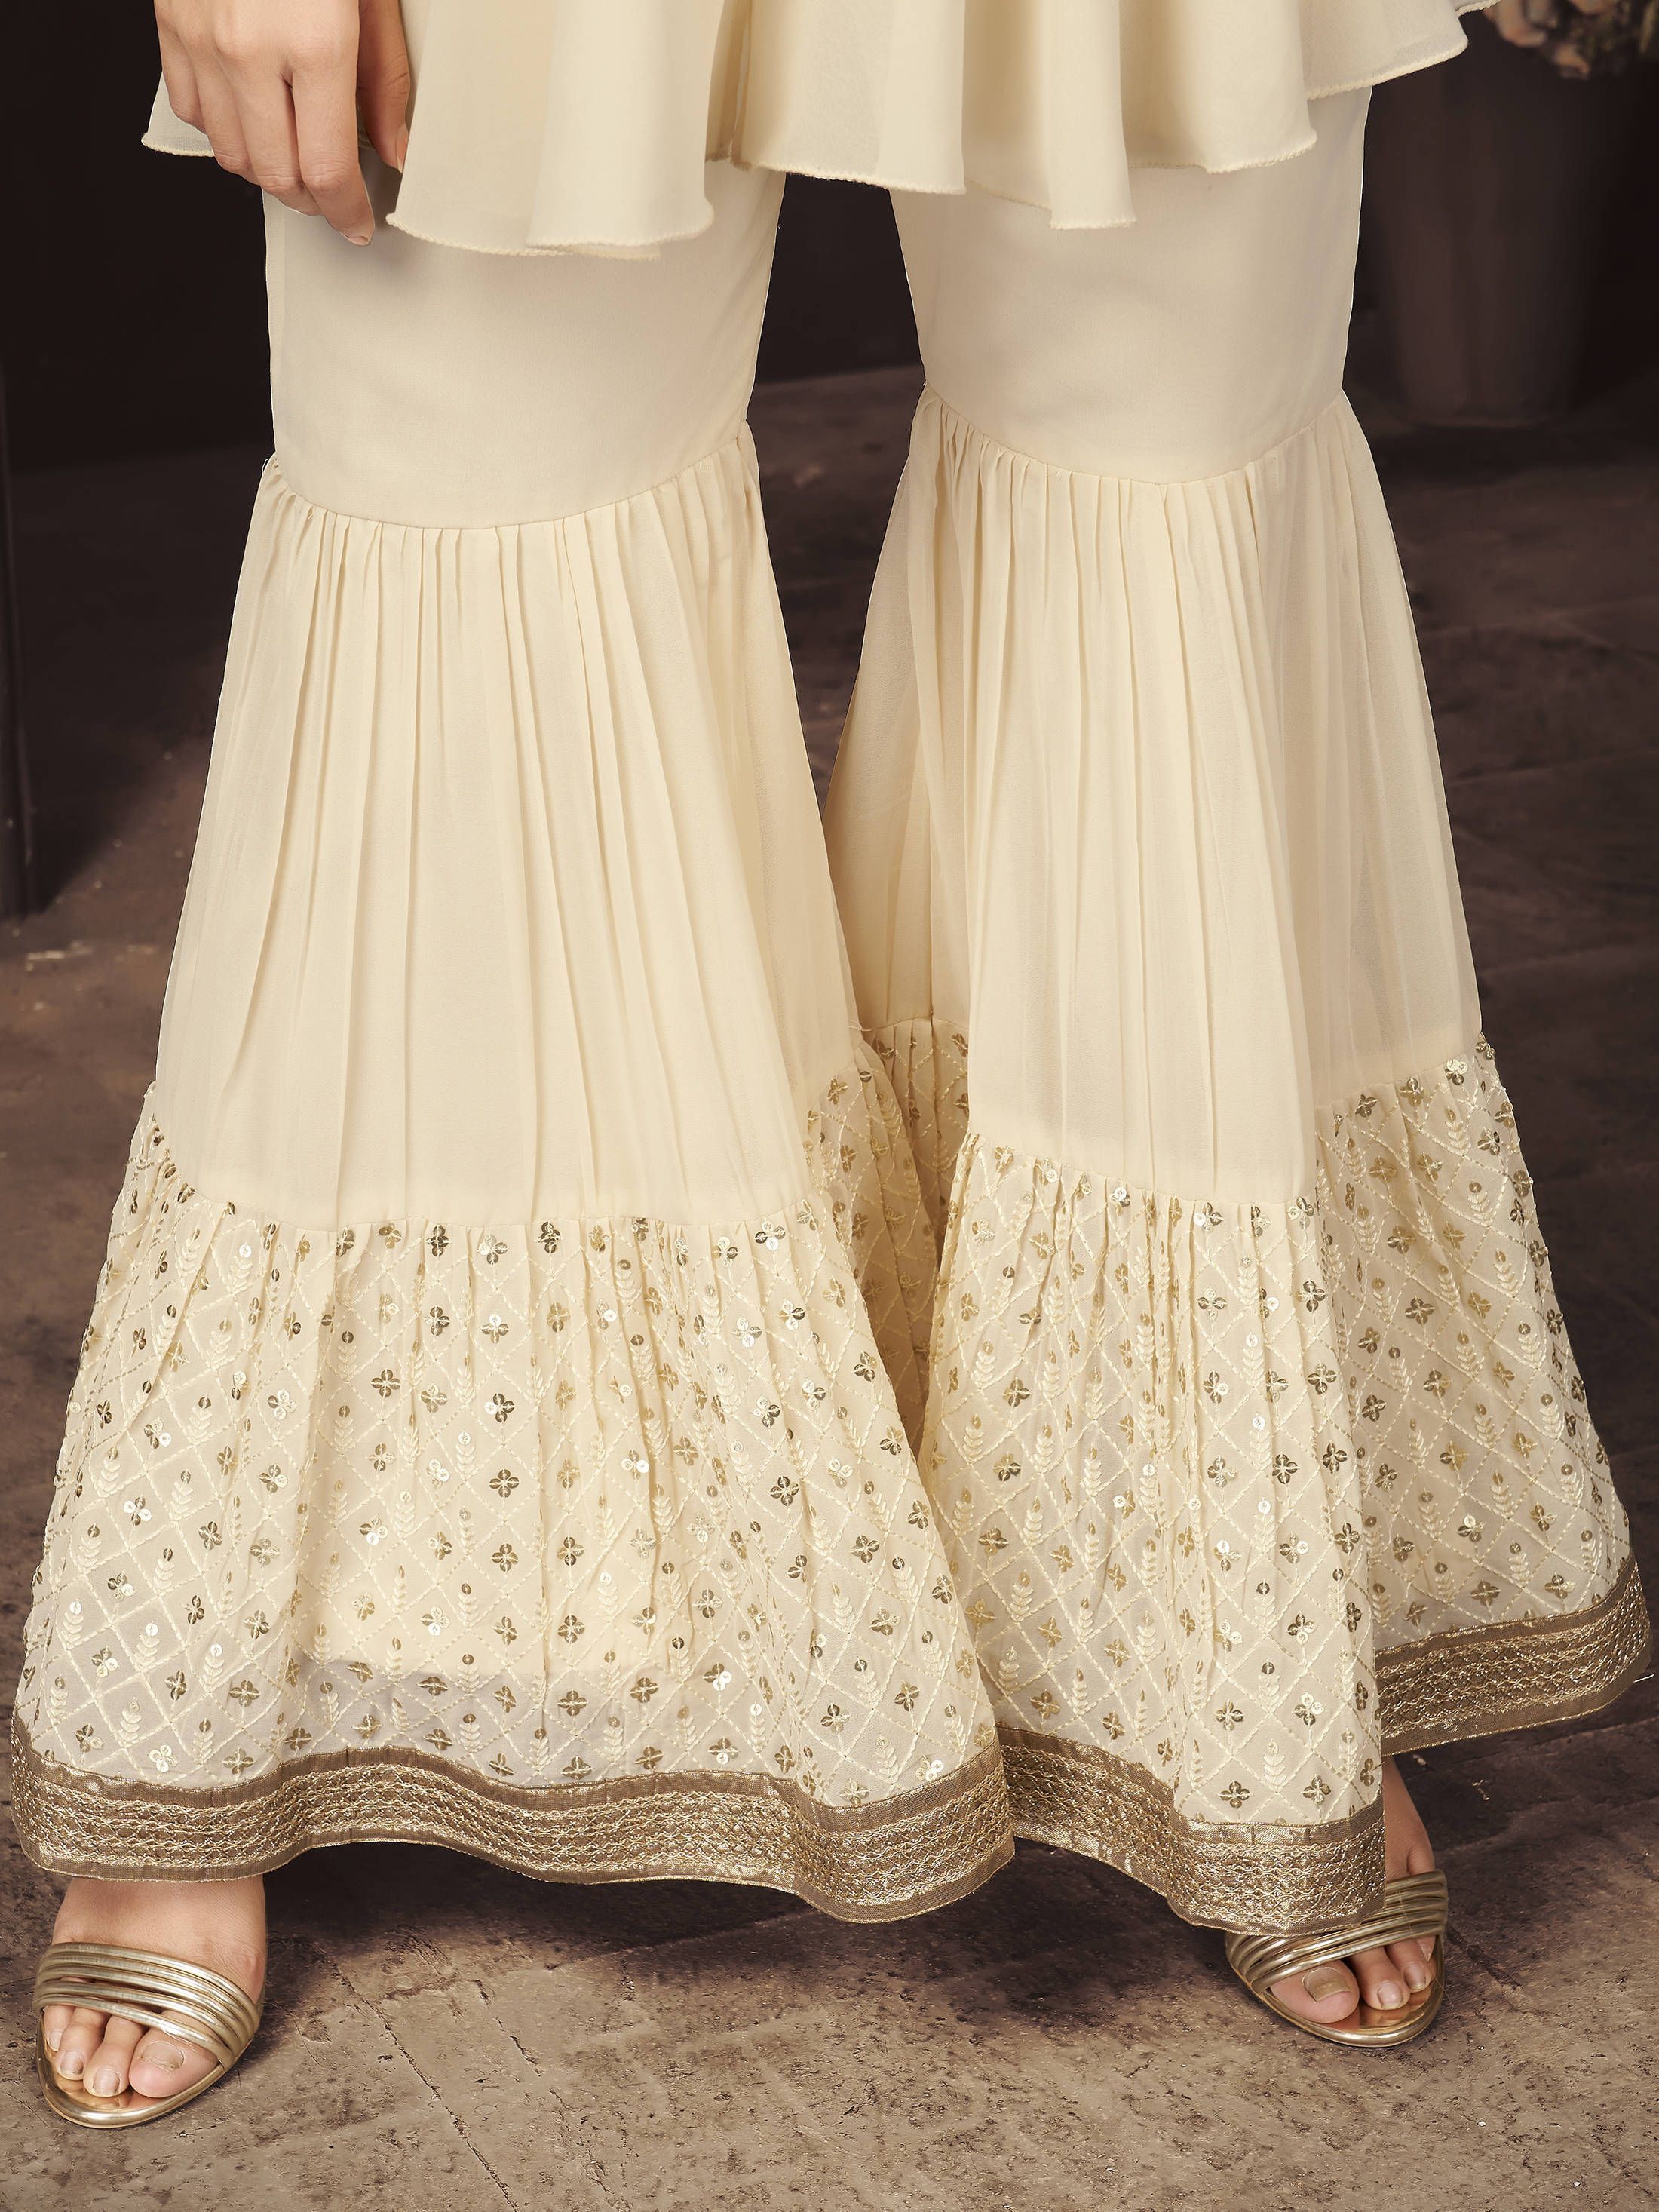 Buy ADVAIT Cotton Frill Golden Lace Off-White Color Gharara/Sharara for  Women Free Size at Amazon.in